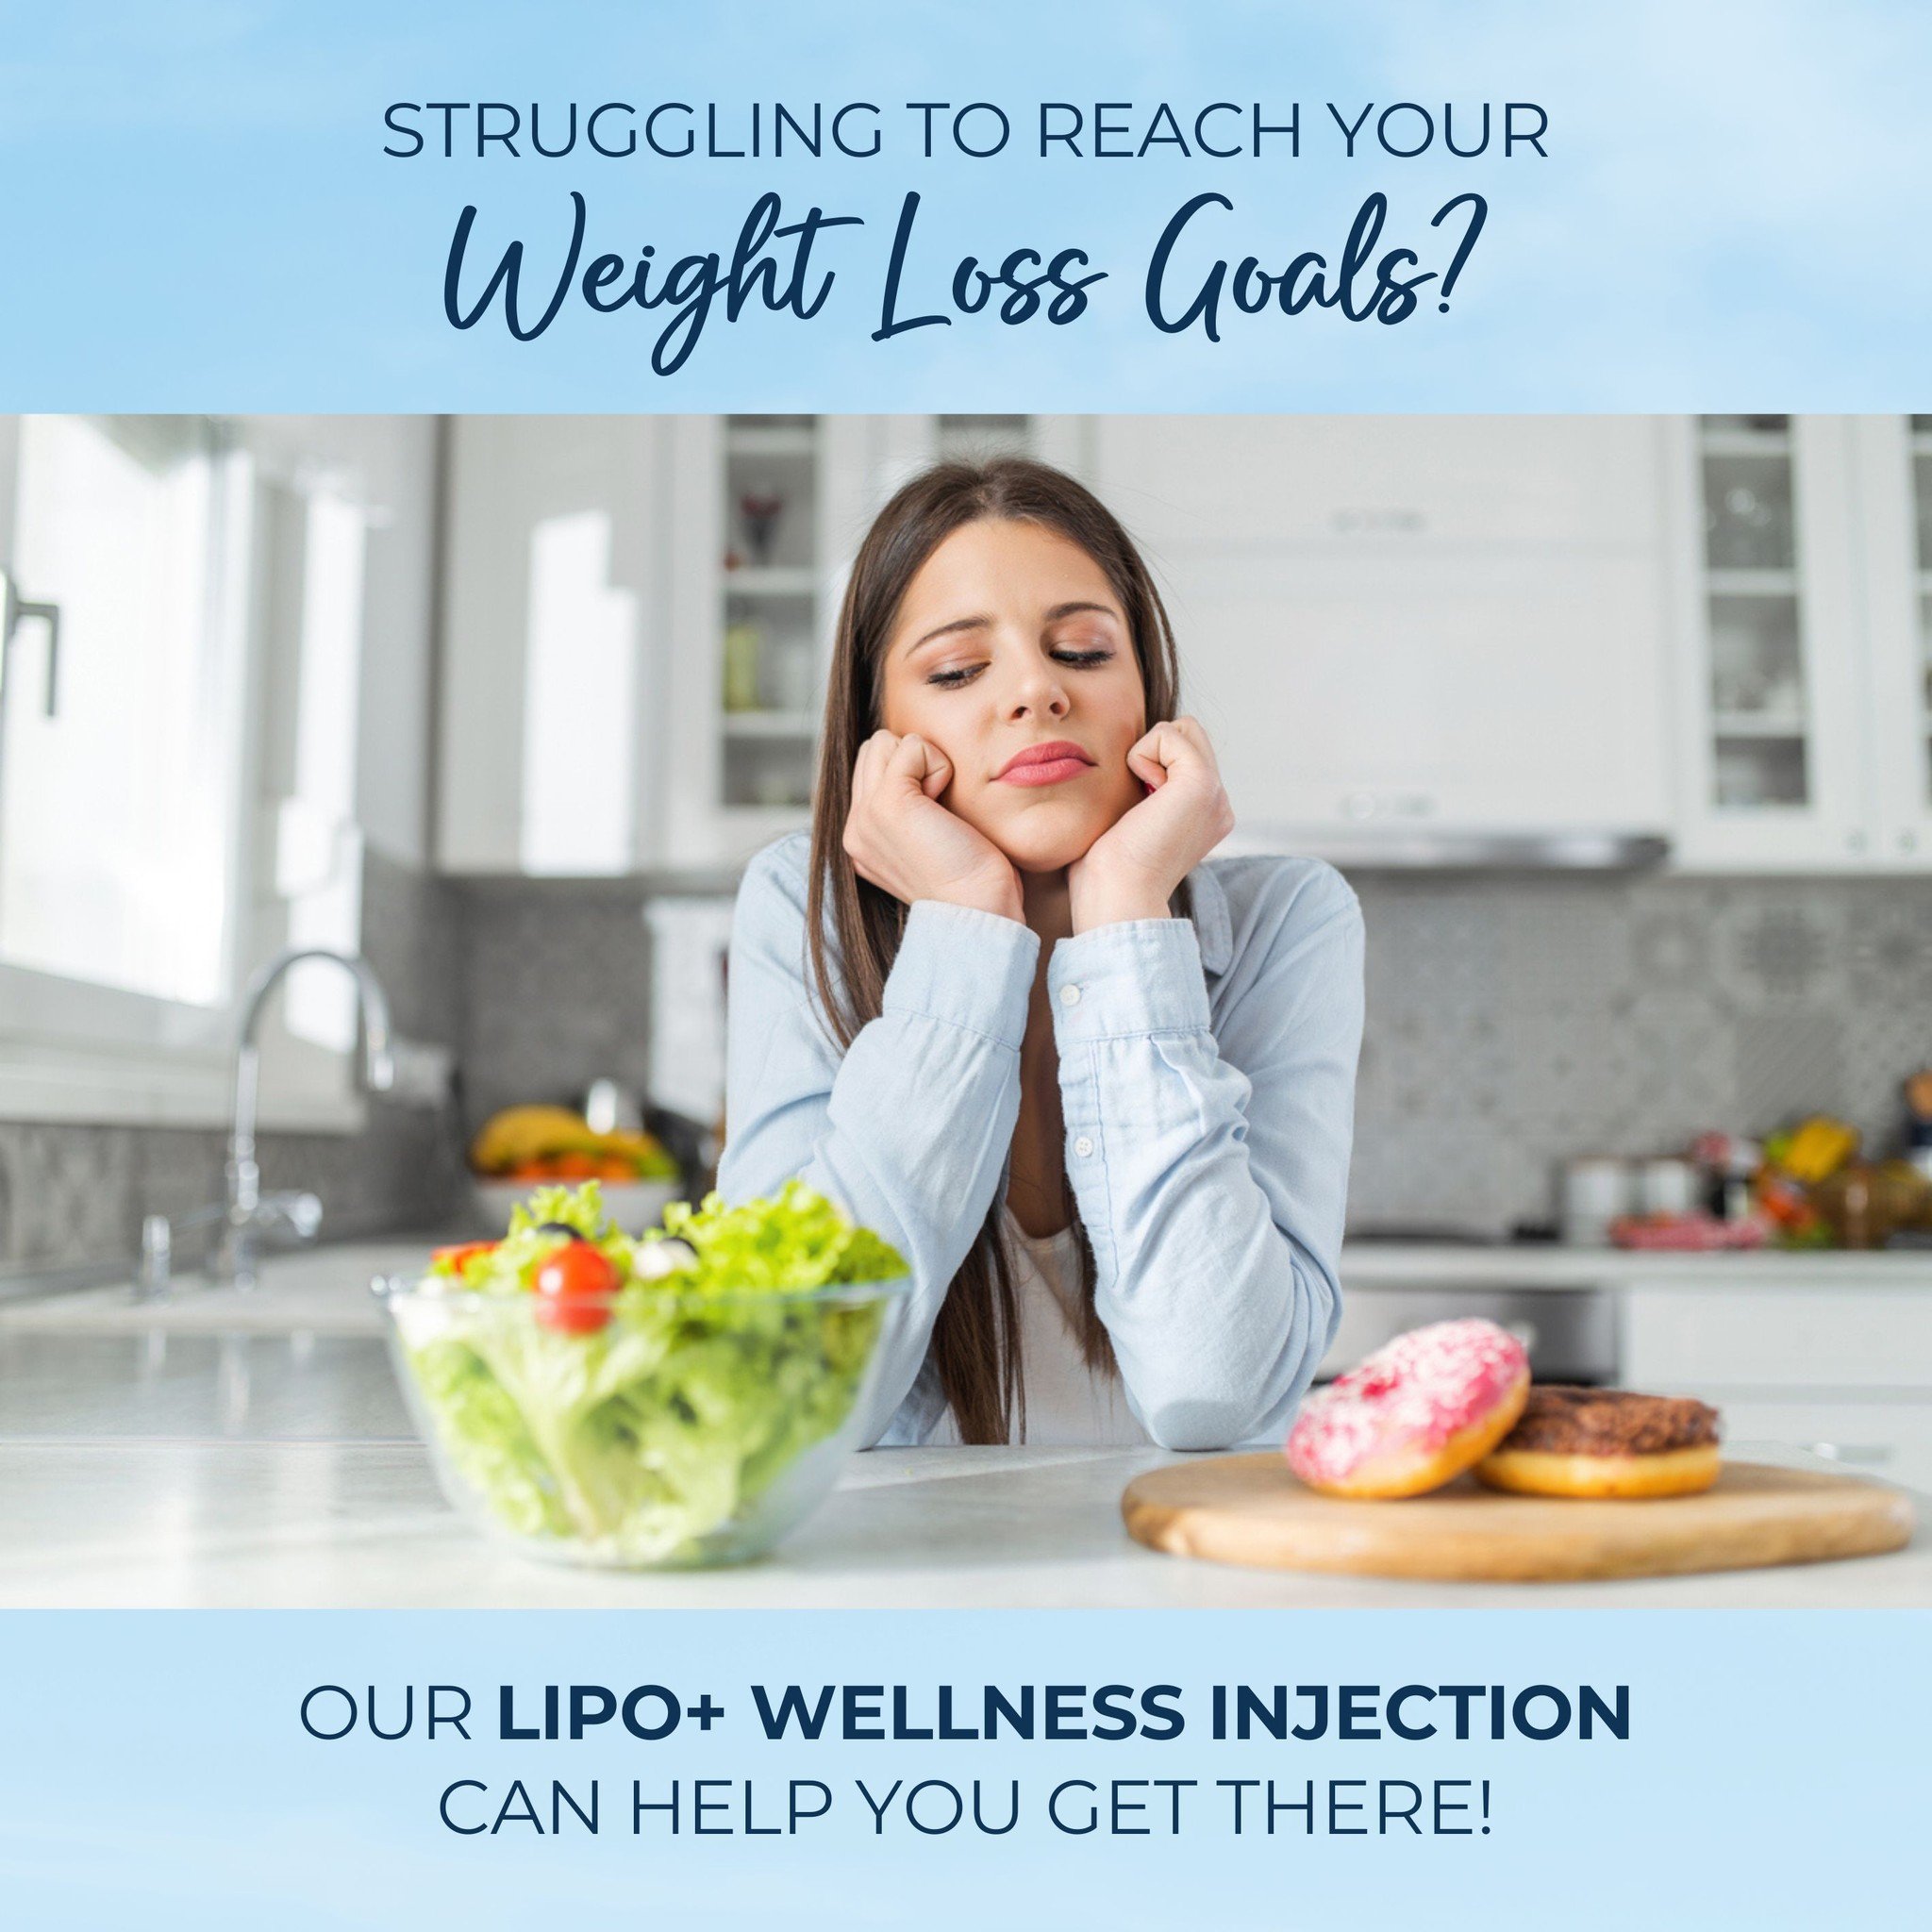 Summer is coming! ☀️ Shedding some extra weight can feel impossible. But what if there was a way to boost your metabolism and burn fat more efficiently?

Our Lipo+ Wellness Injection can help!

This specialized formula combines B6, Methionine, Inosit